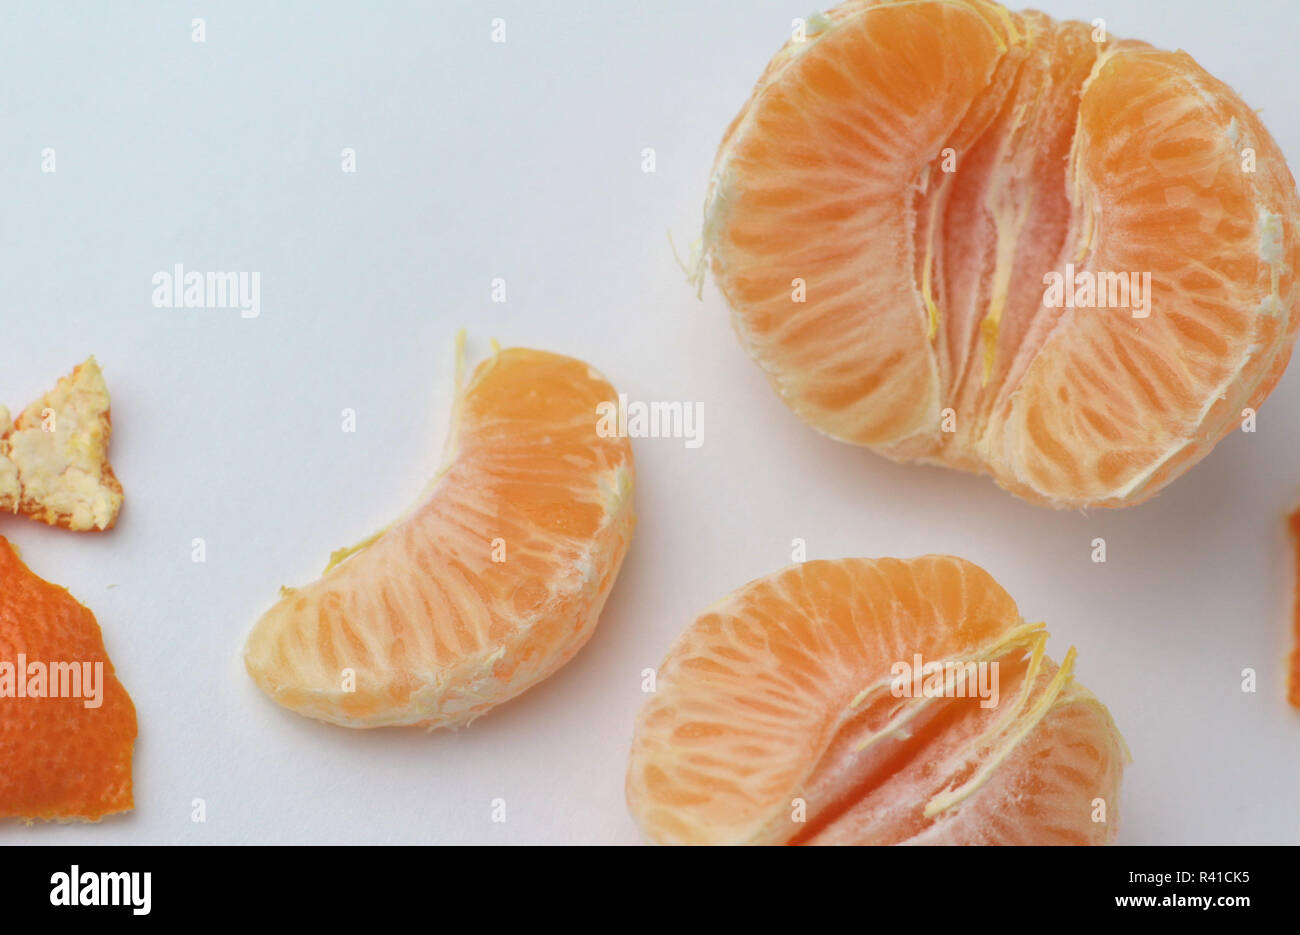 Mandarins, wholes and slices Stock Photo